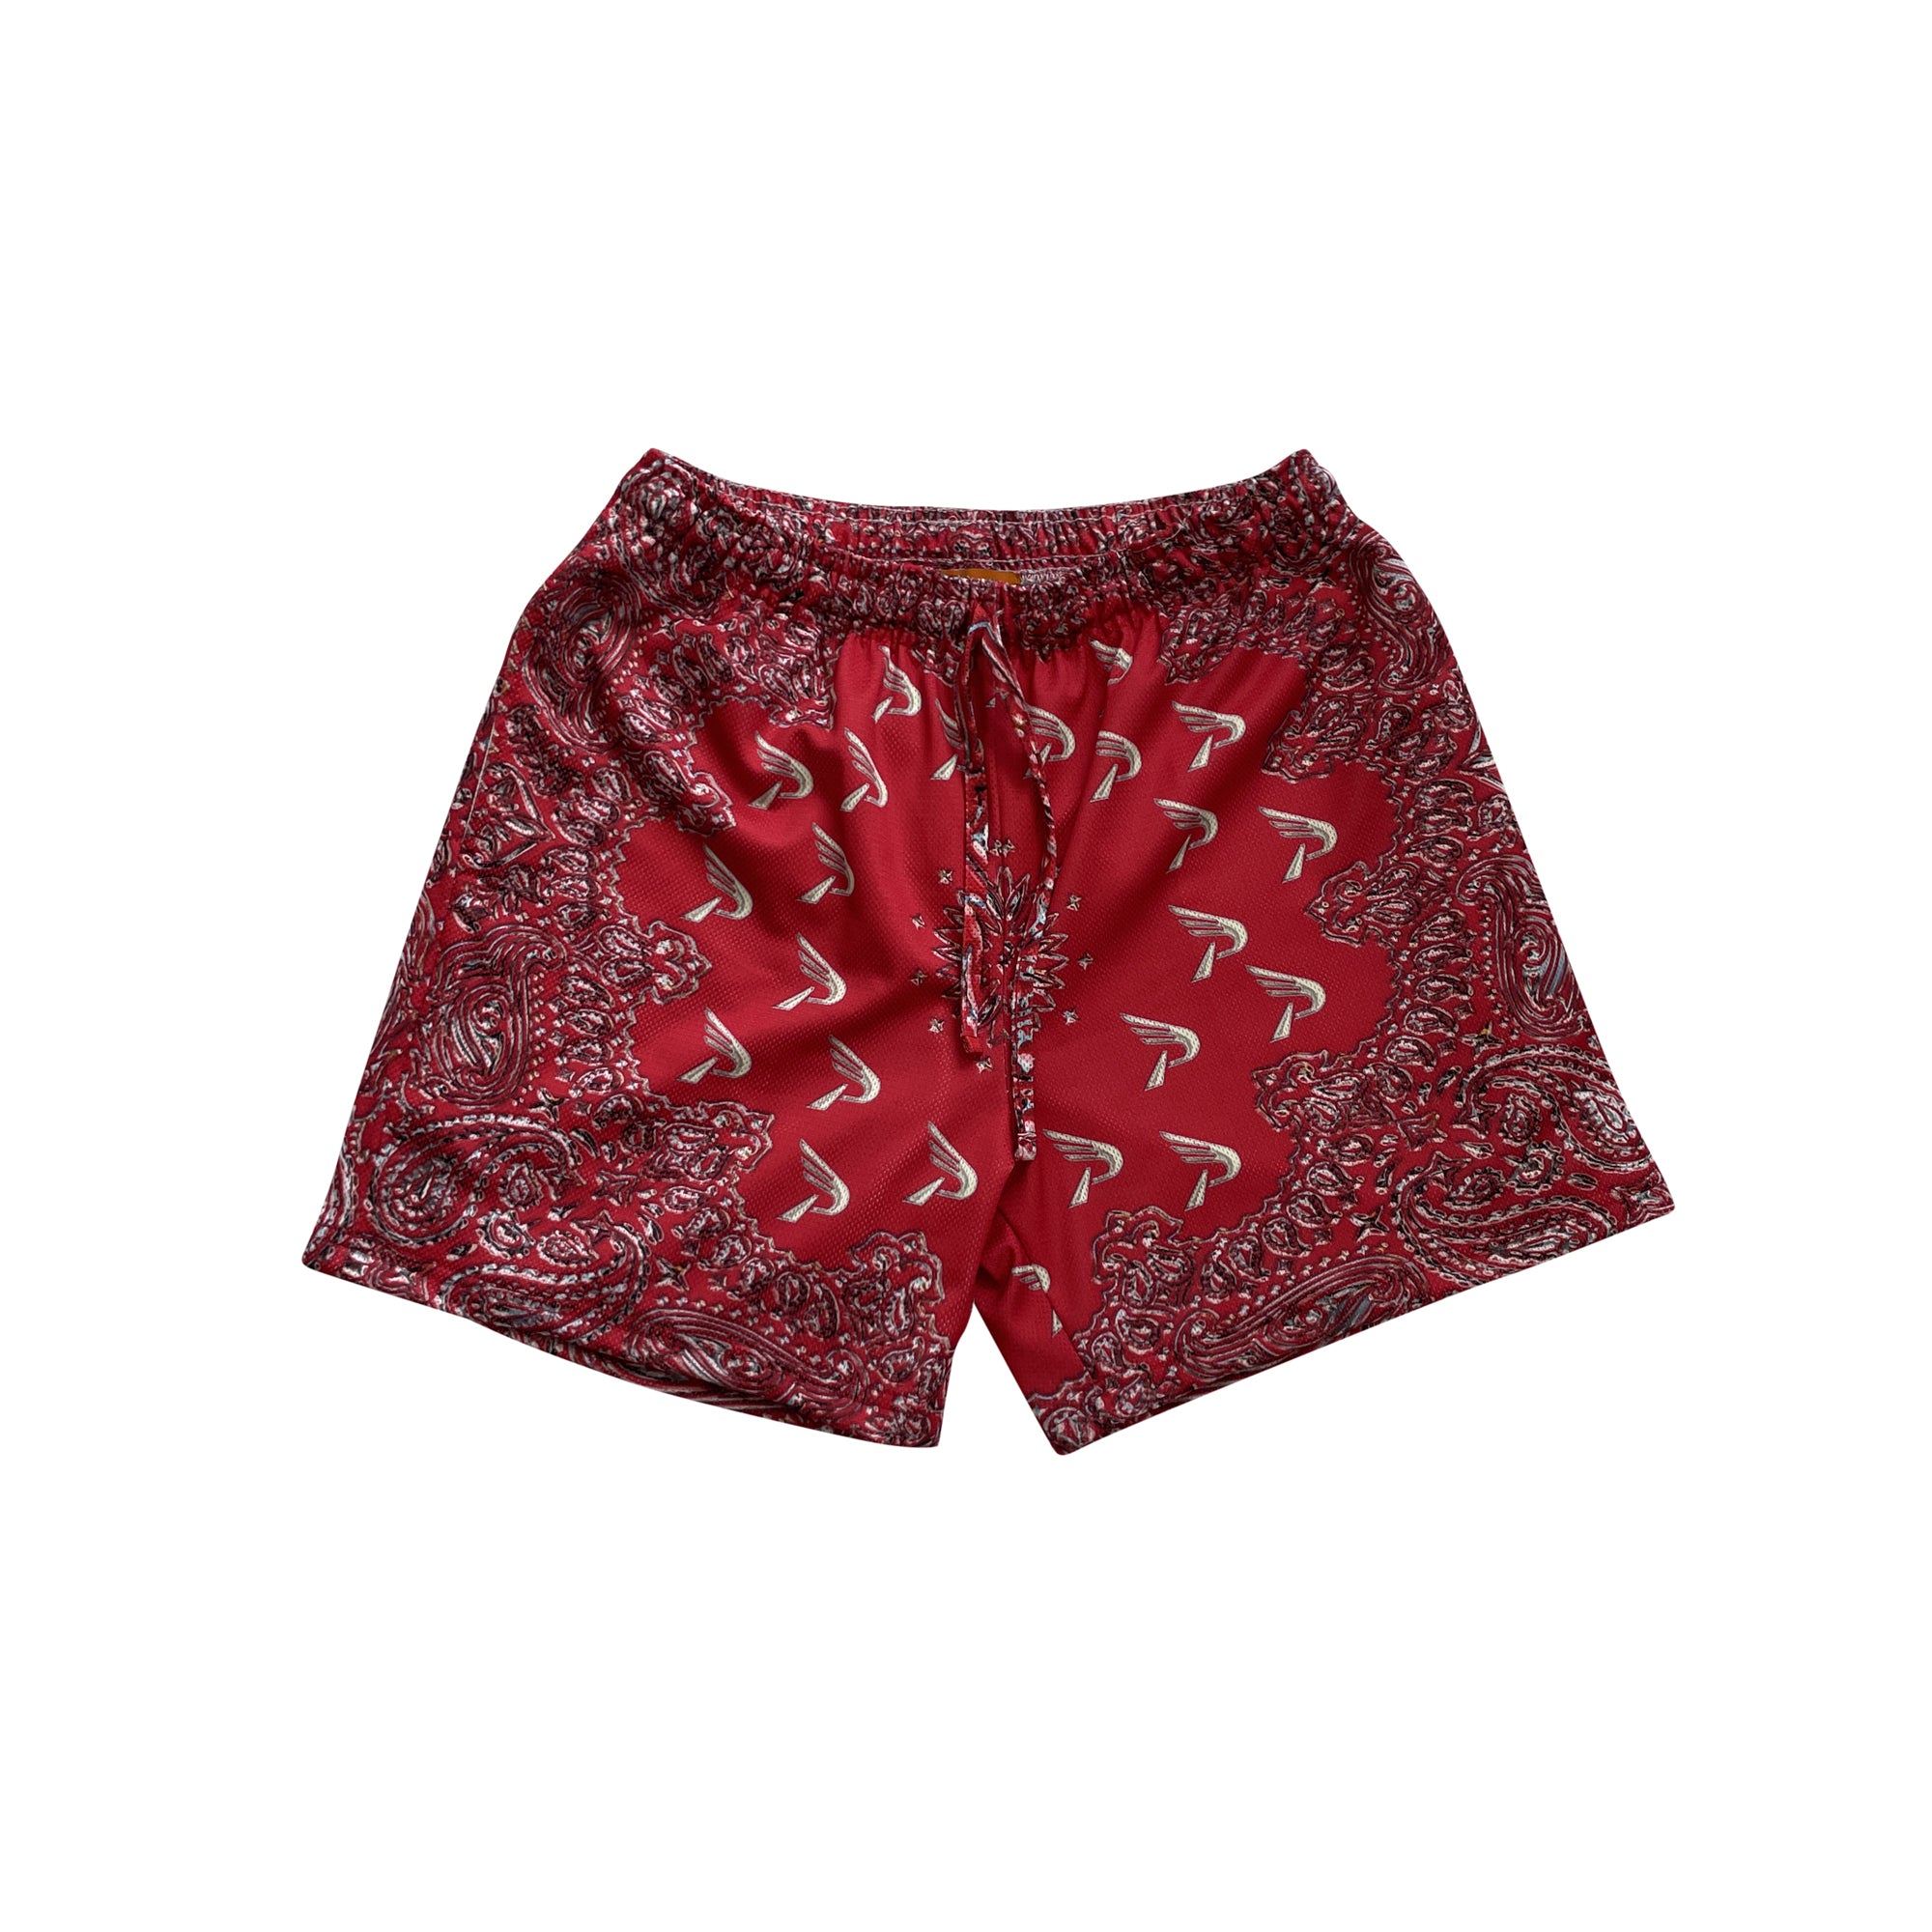 Povrich chrome shorts in red. Comfortable and stylish shorts for any occasion